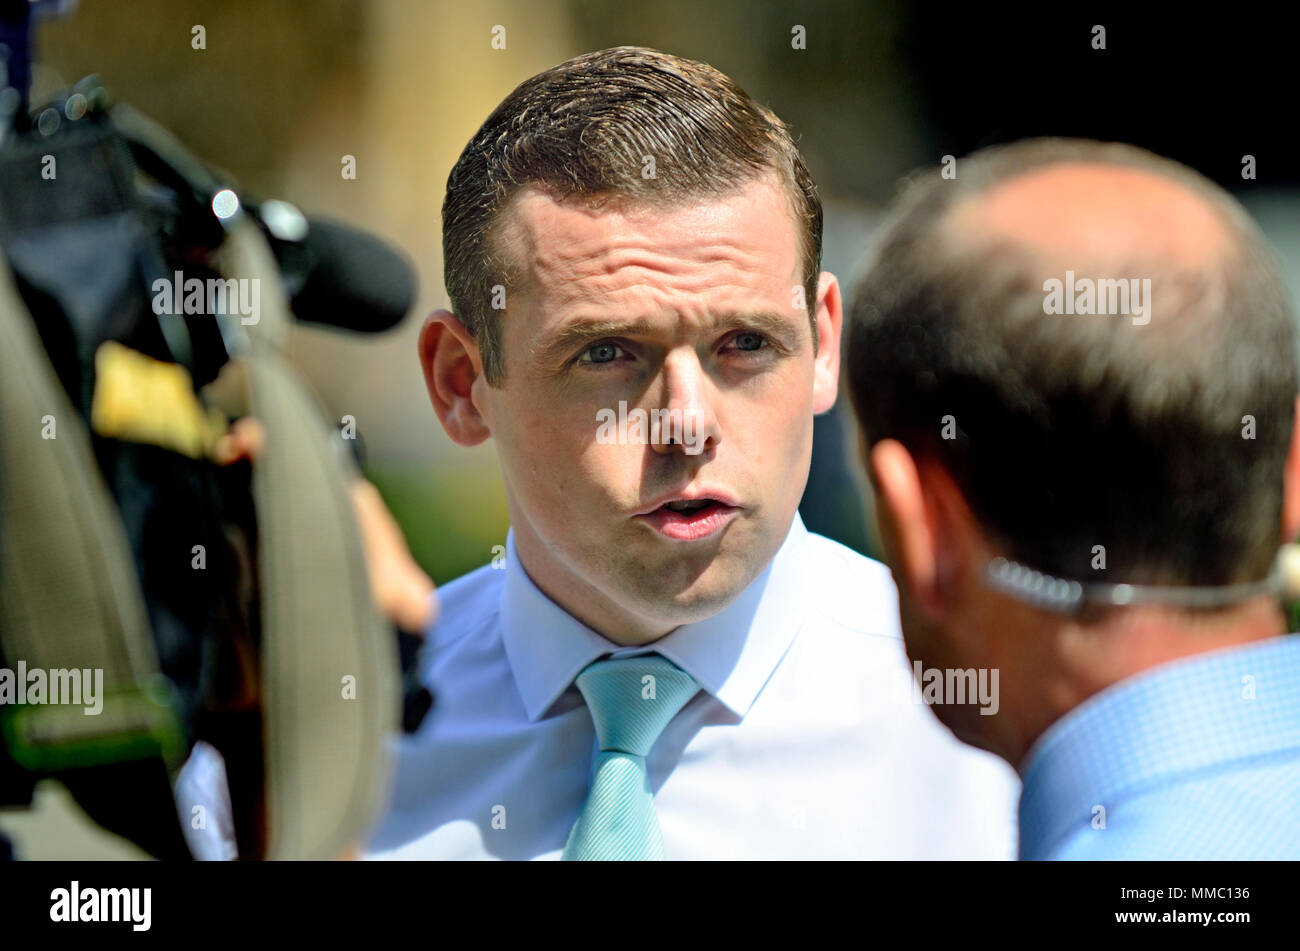 Douglas Ross MP (Conservative: Moray) being interviewed on College Green, Westminster by BBC's Norman Smith. Stock Photo